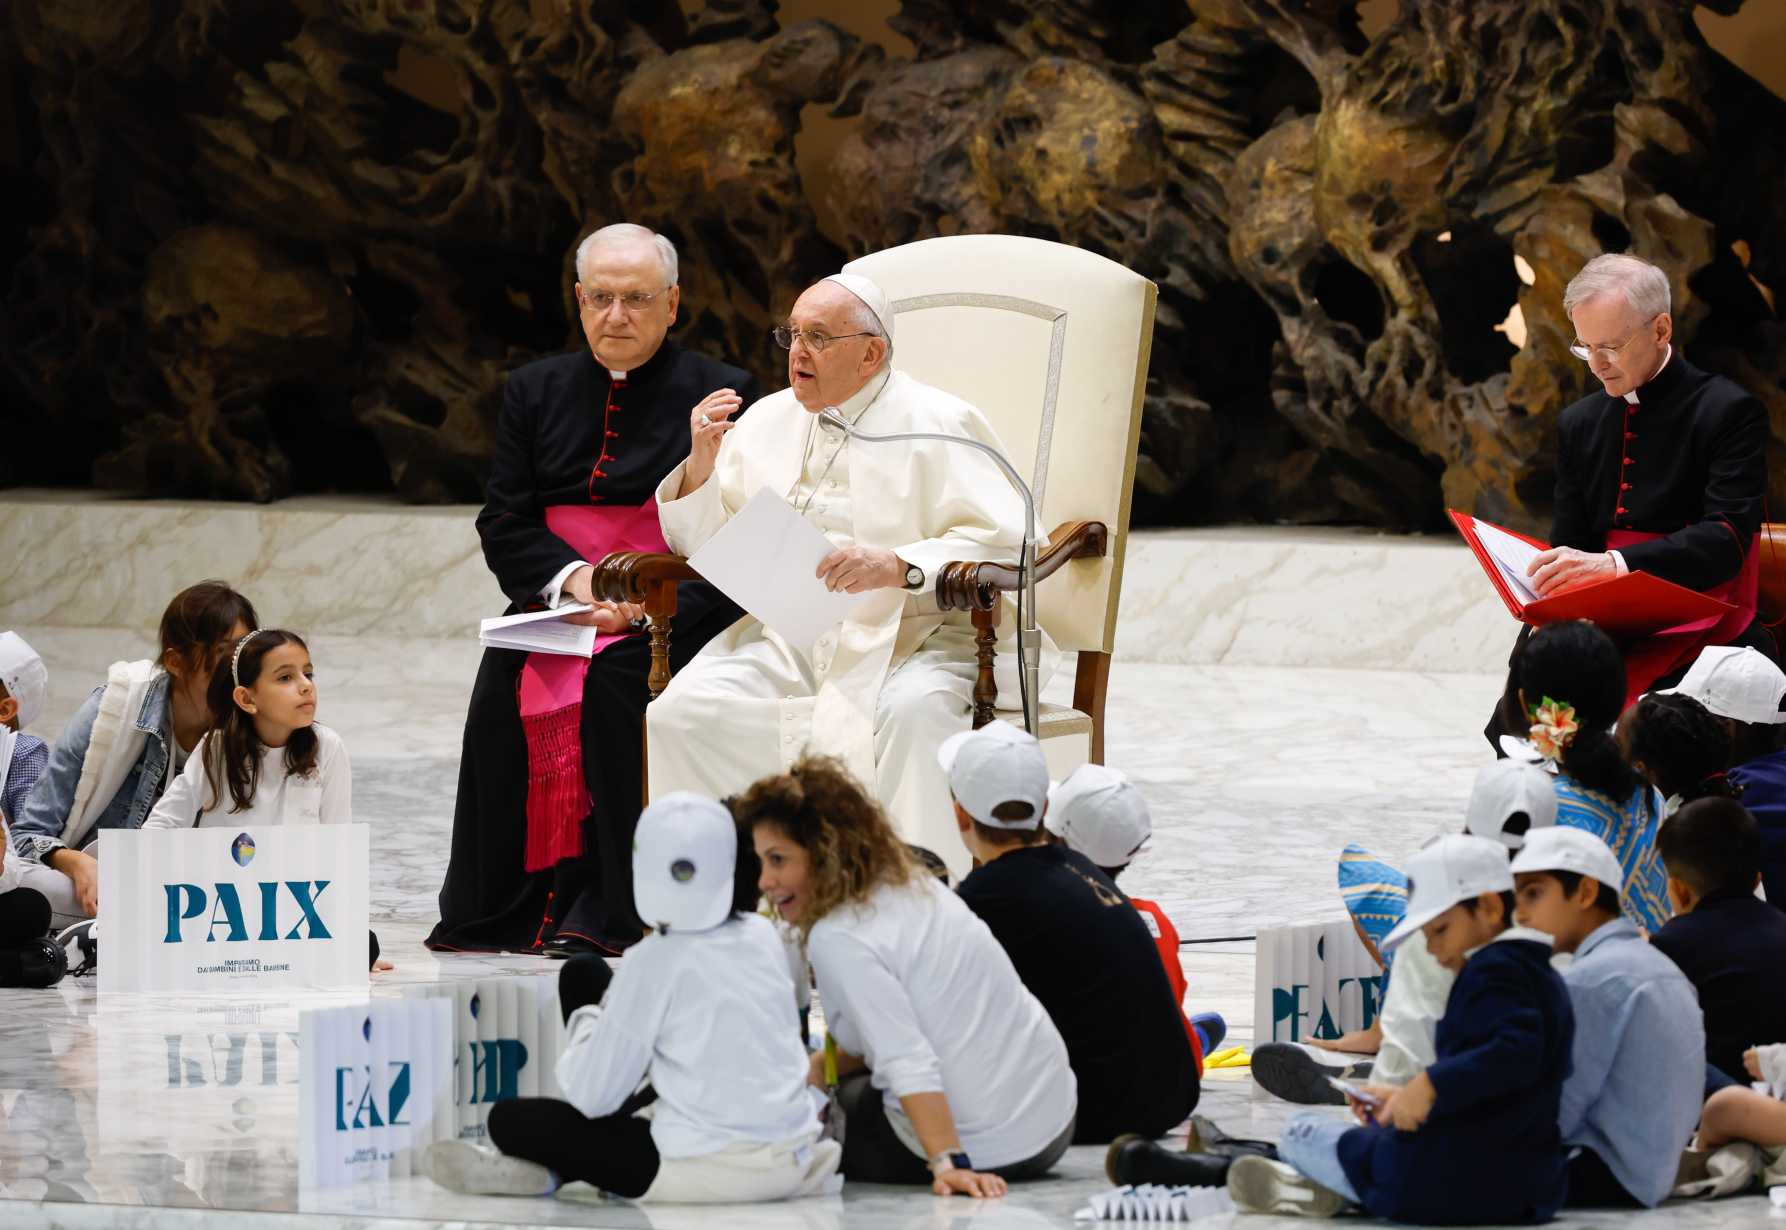 Pope asks children to make the world better, one little step at a time